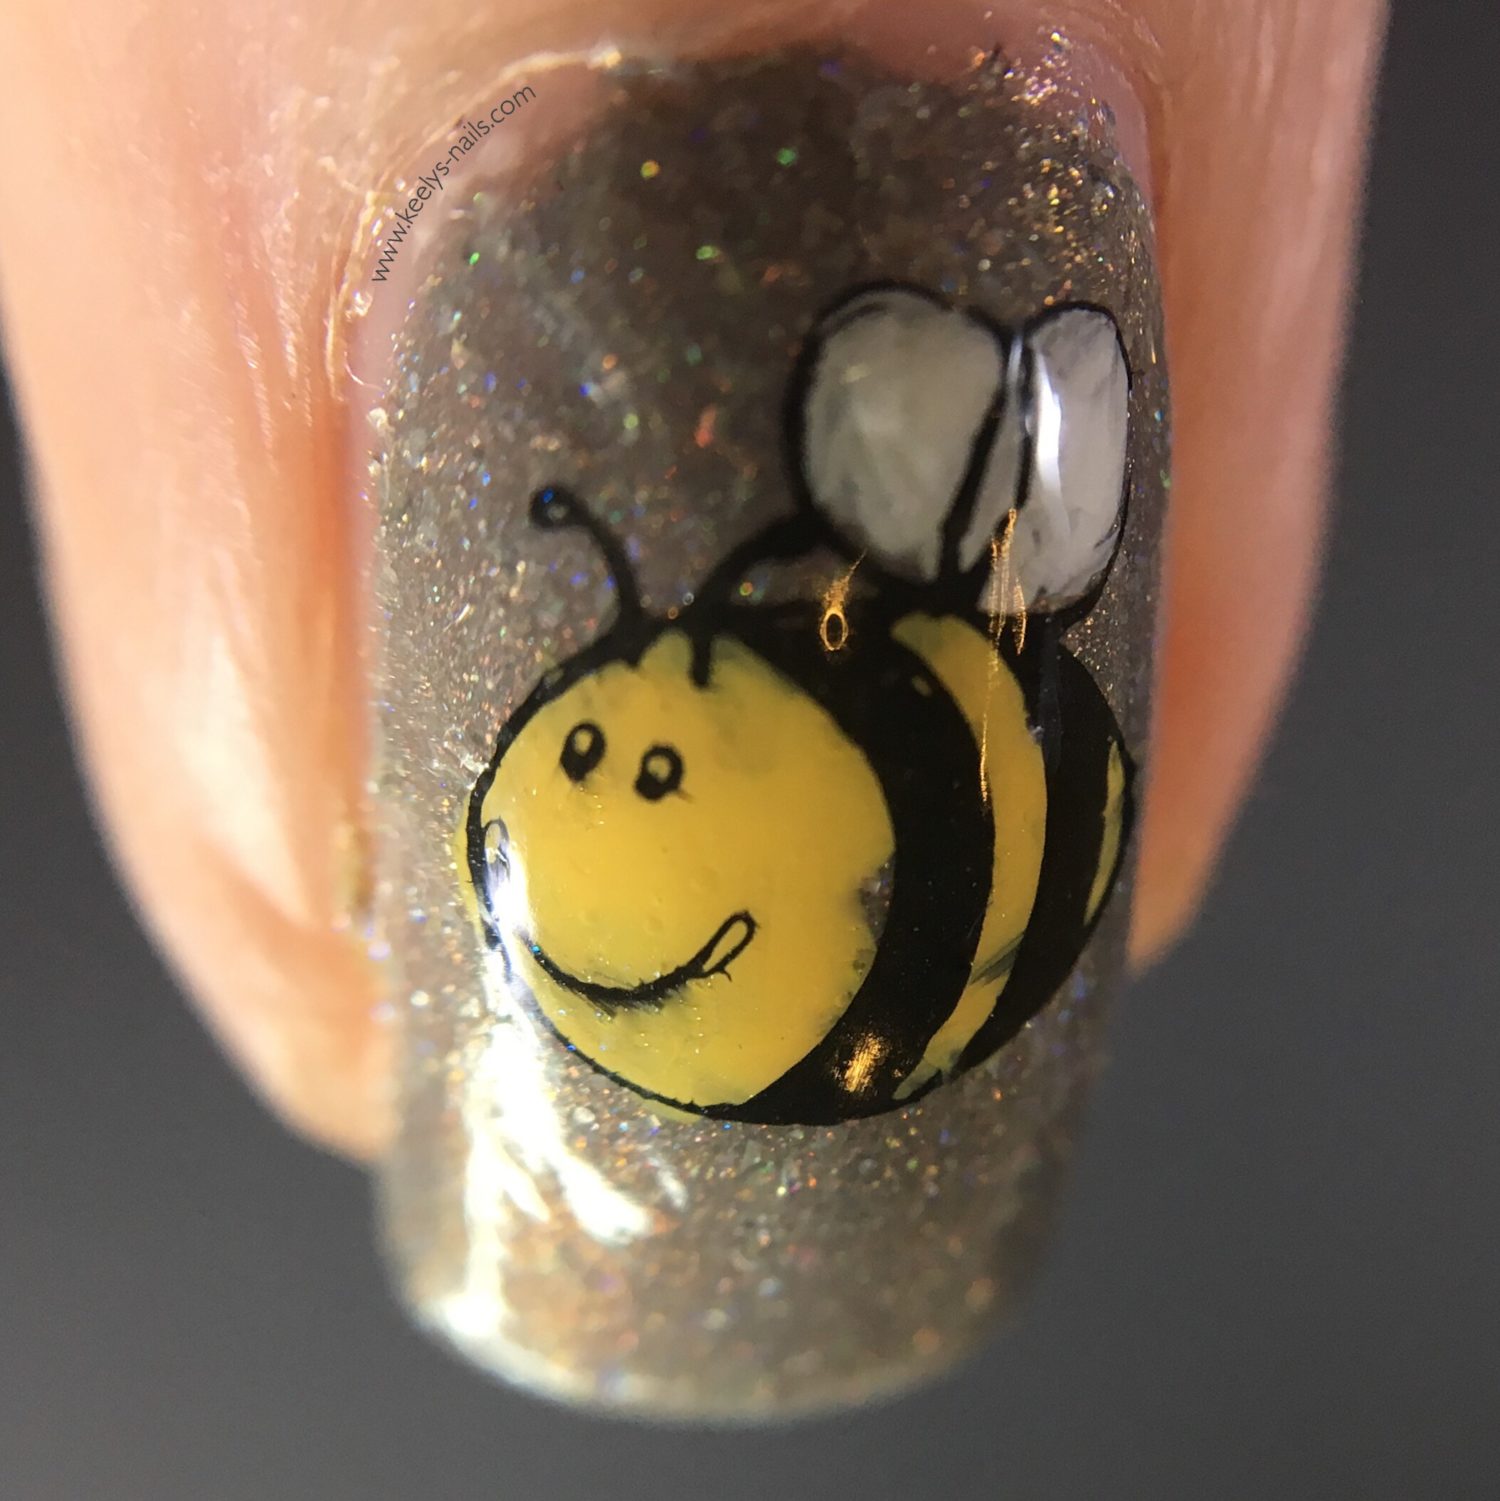 Worker Bee nail art for Manchester macro